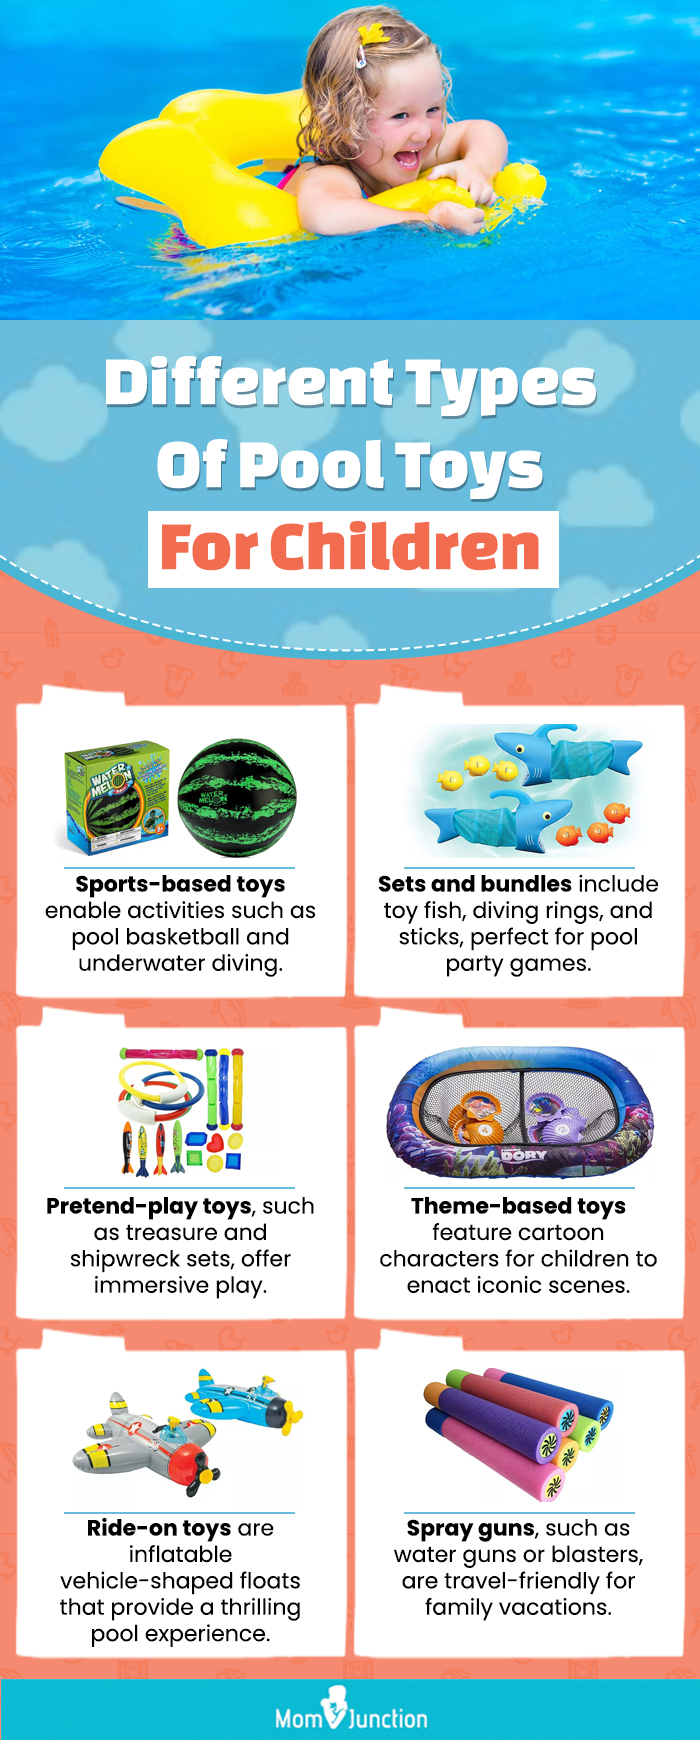 Different Types Of Pool Toys For Children (infographic)